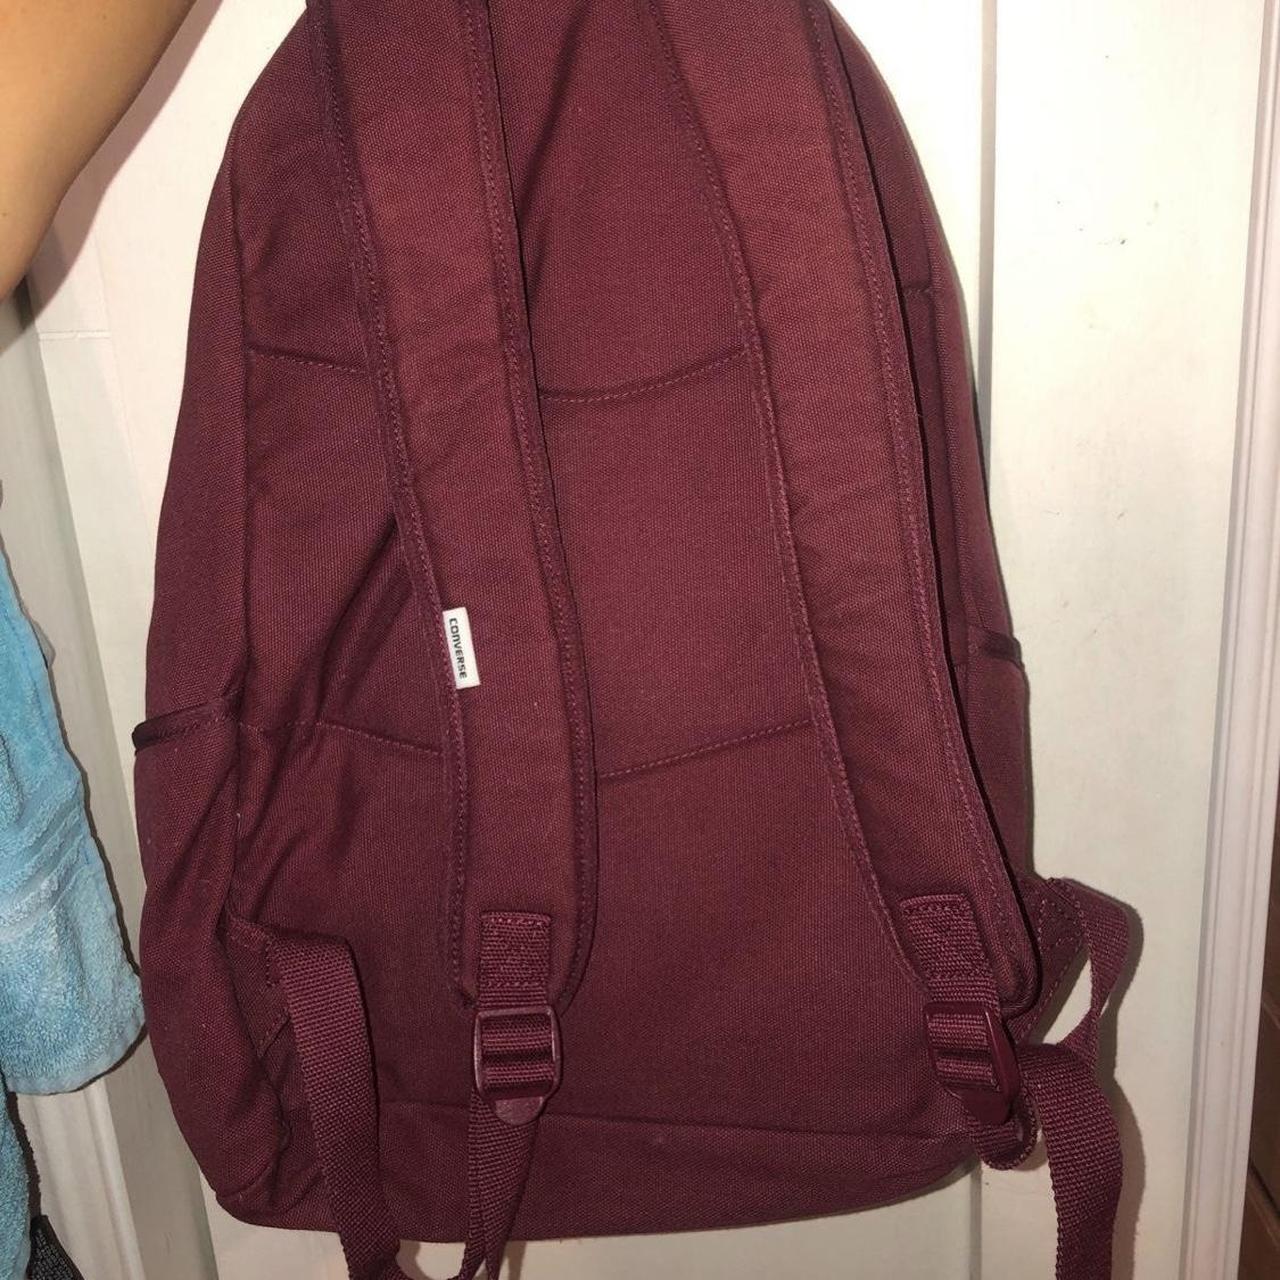 Converse Women's Burgundy and Red Bag | Depop